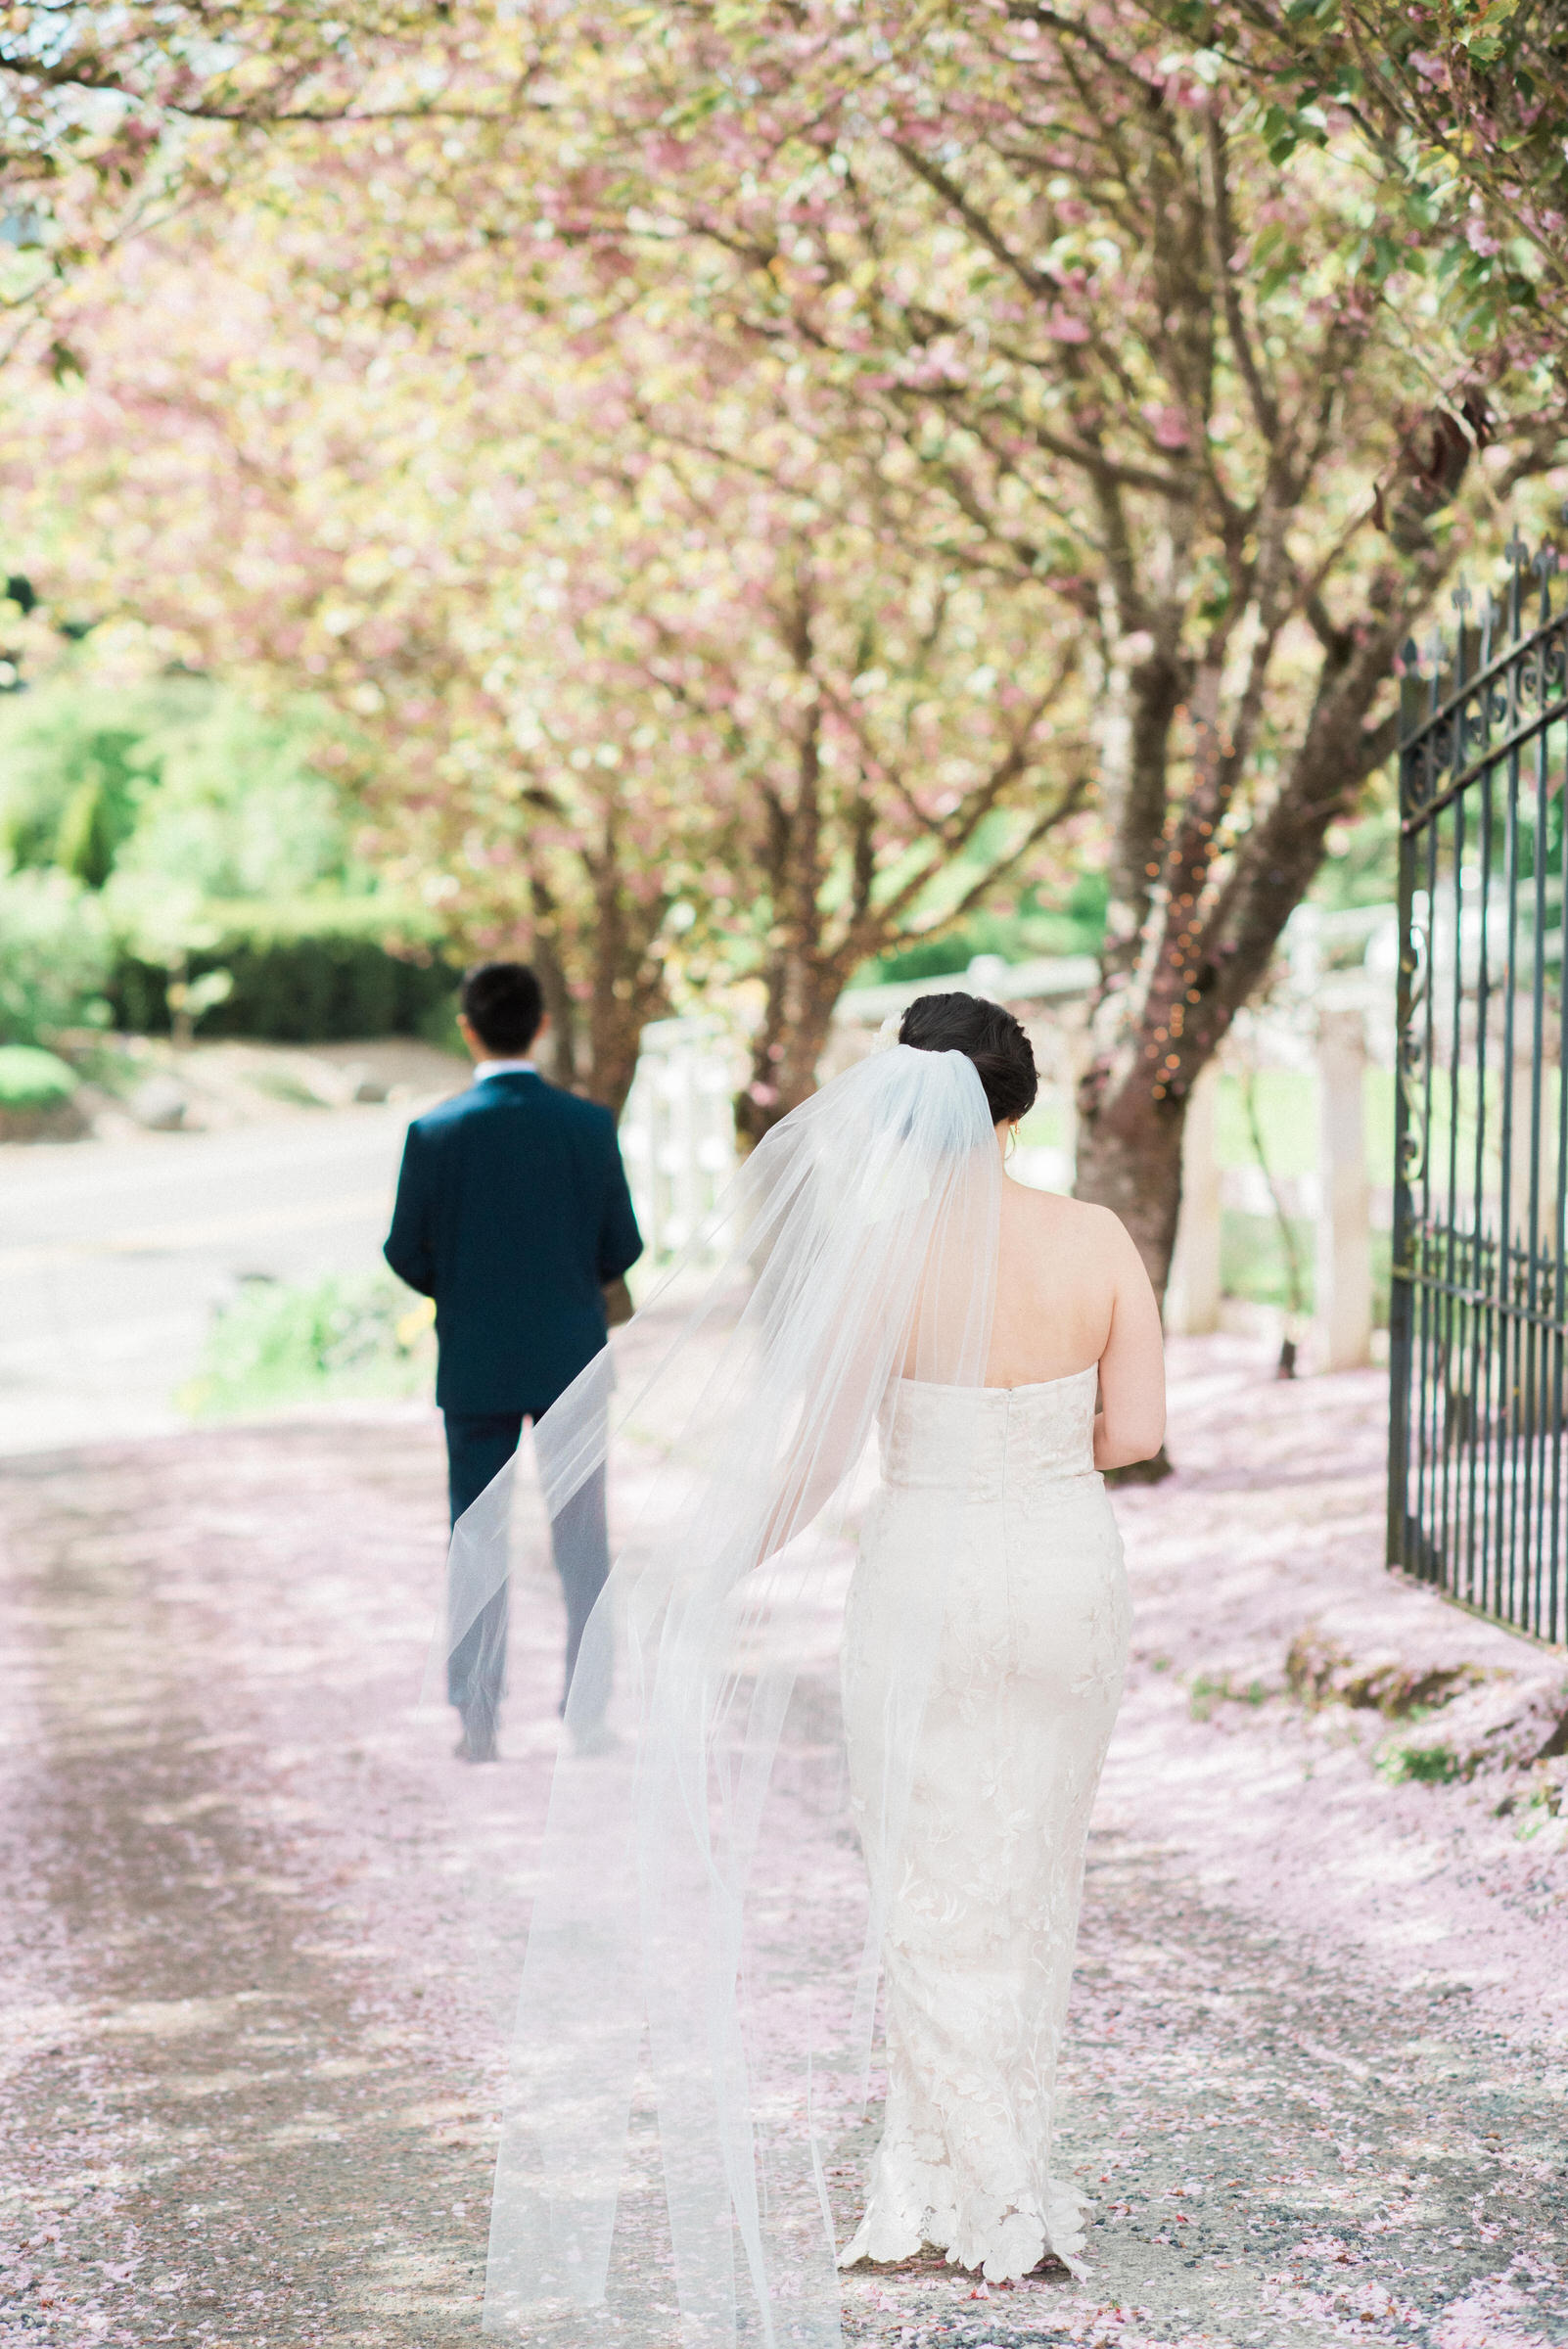 A Spring Wedding at DeLille Cellars: Angela and Sheng (25)